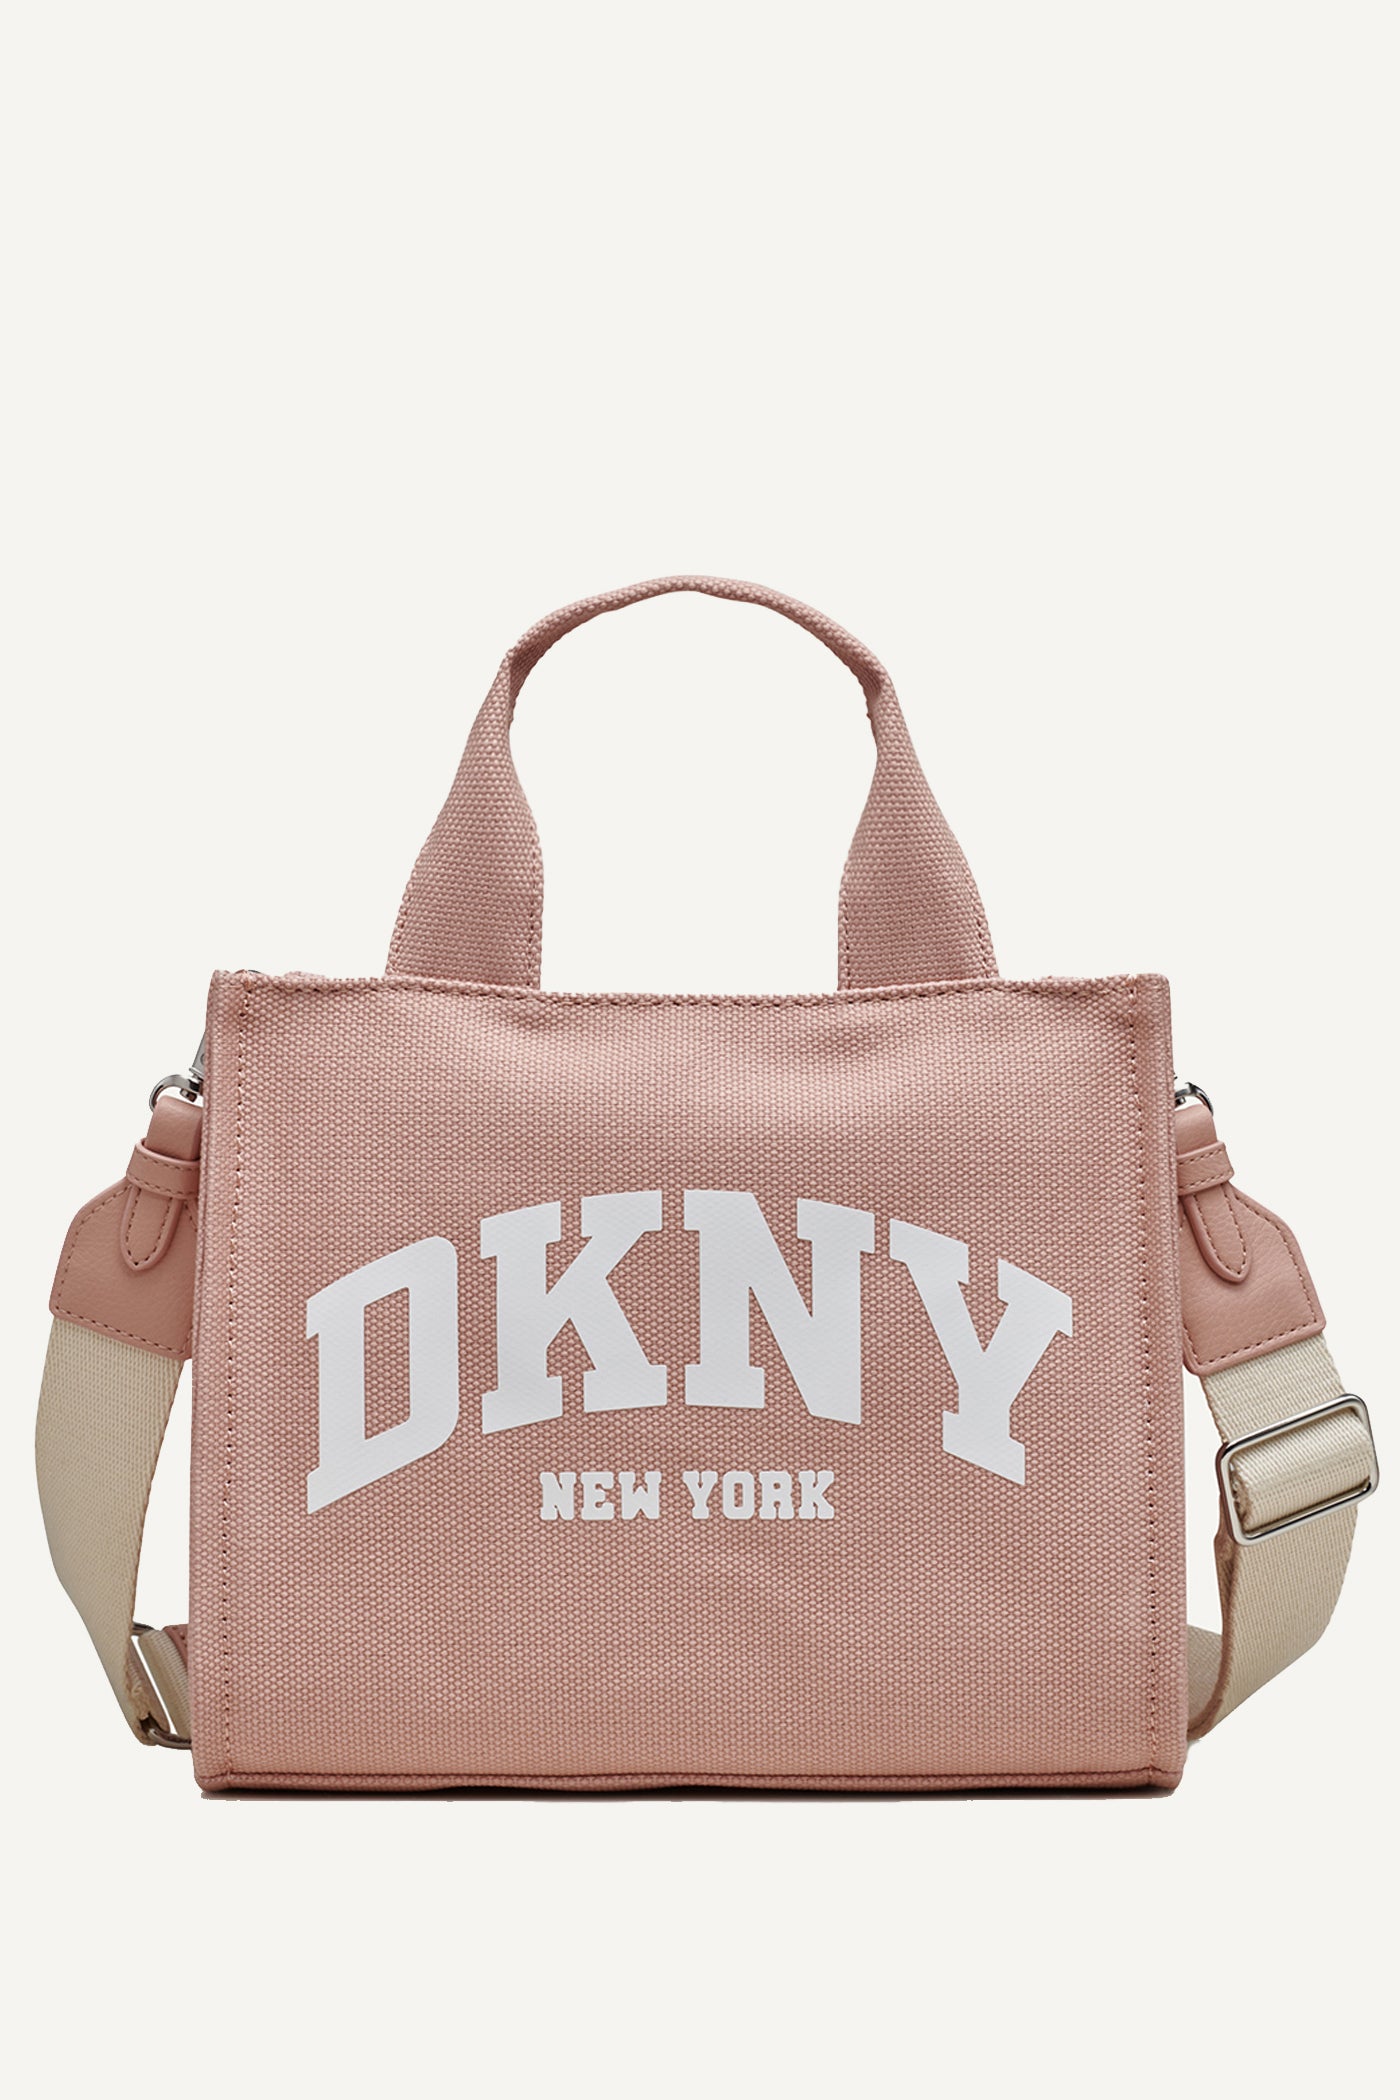 DKNY HADLEE SMALL TOTE,Pink